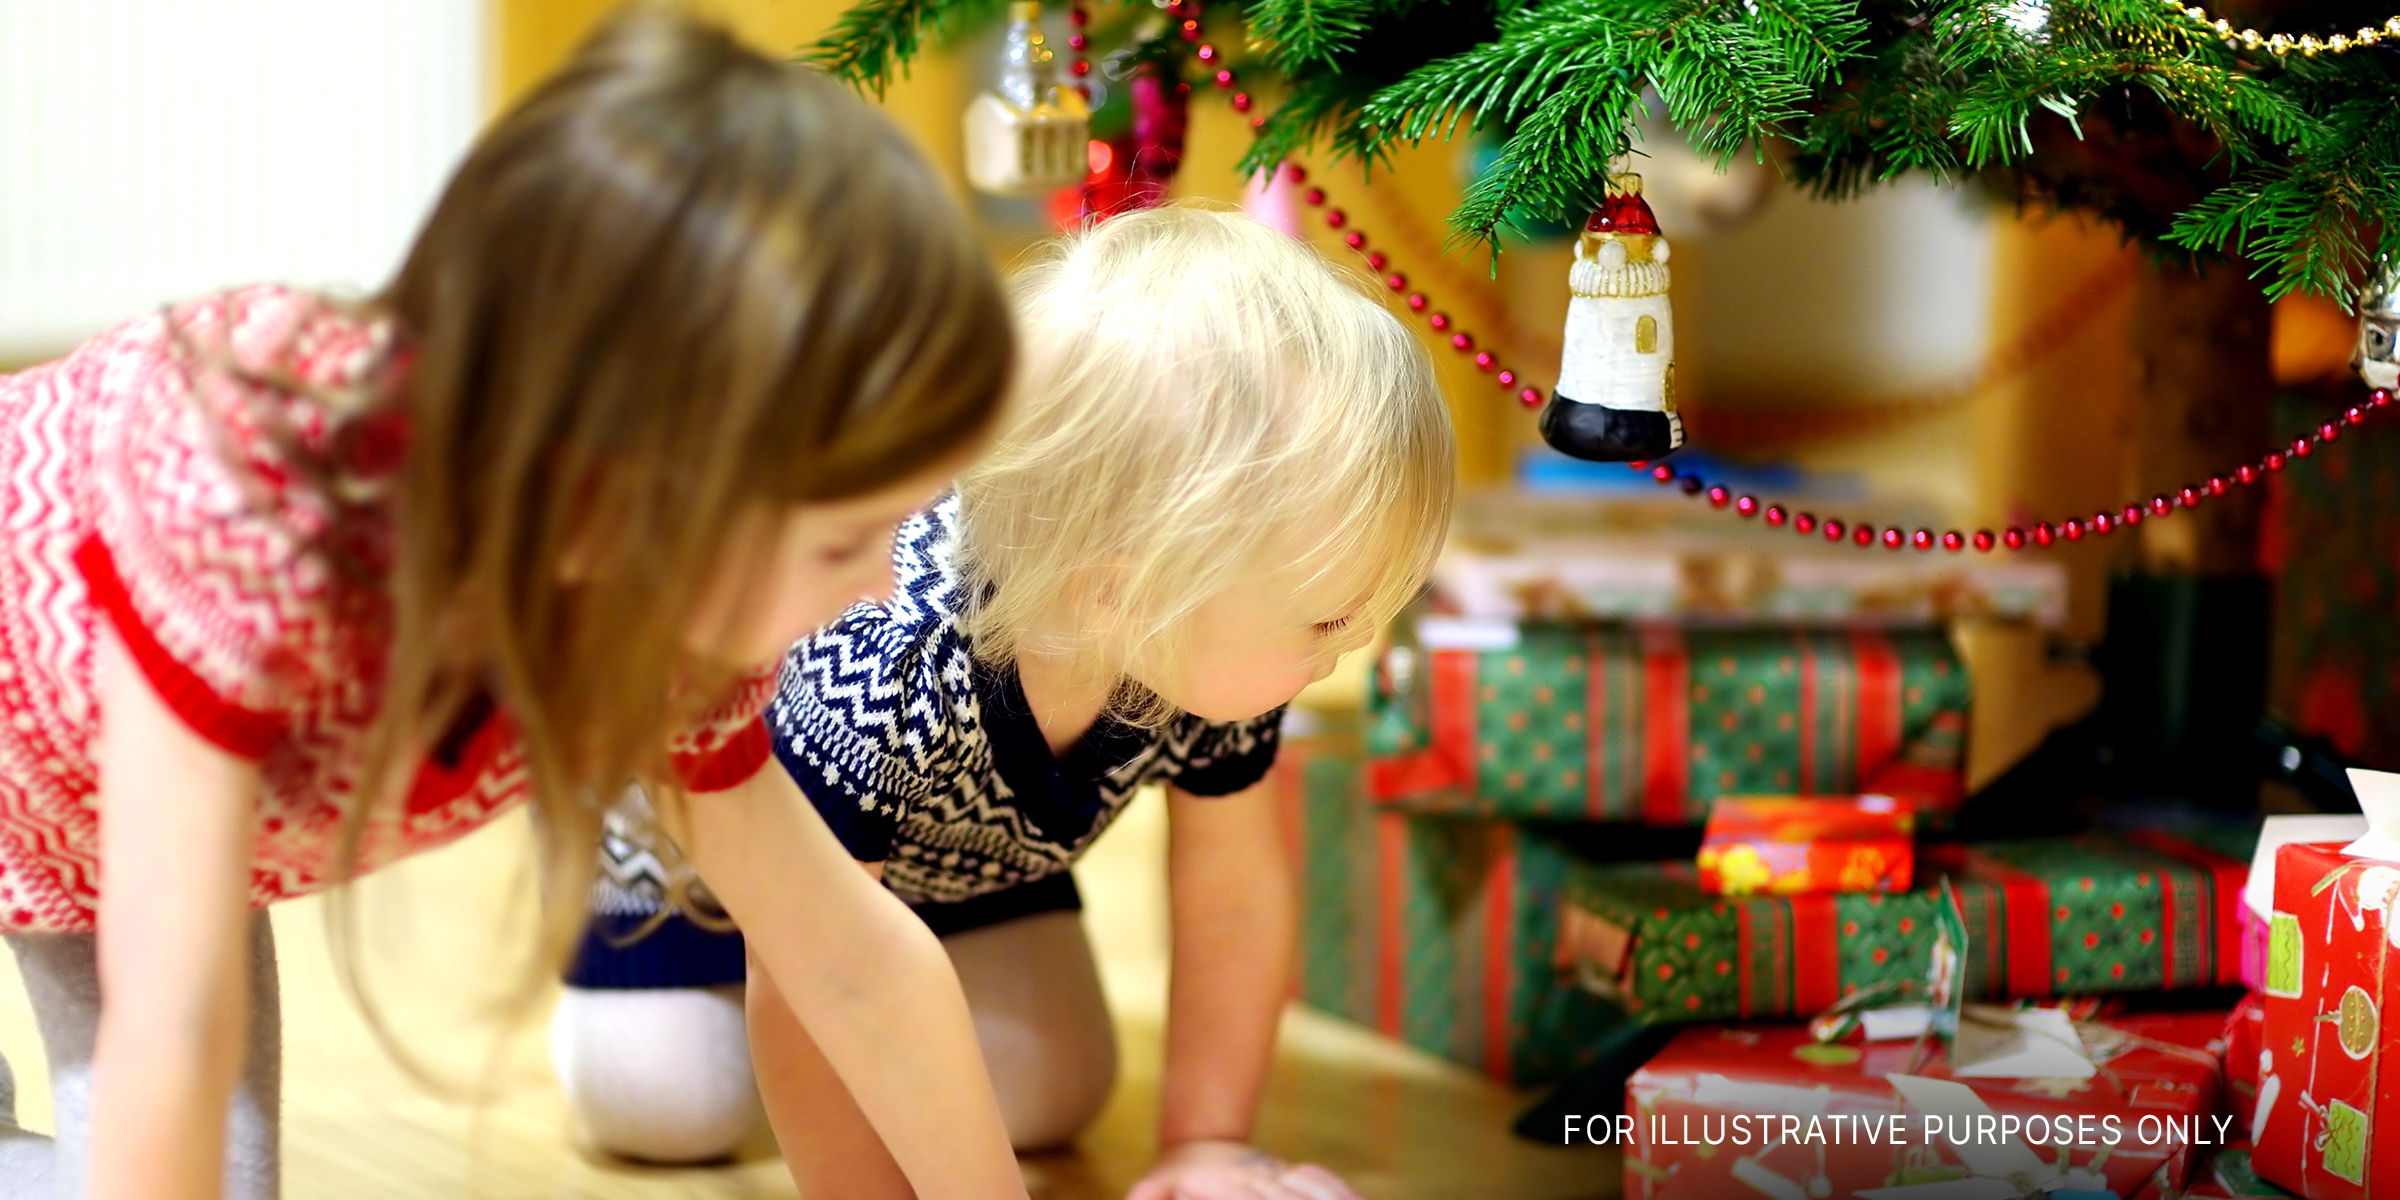 Children looking at gifts under the Christmas tree | Source: Shutterstock